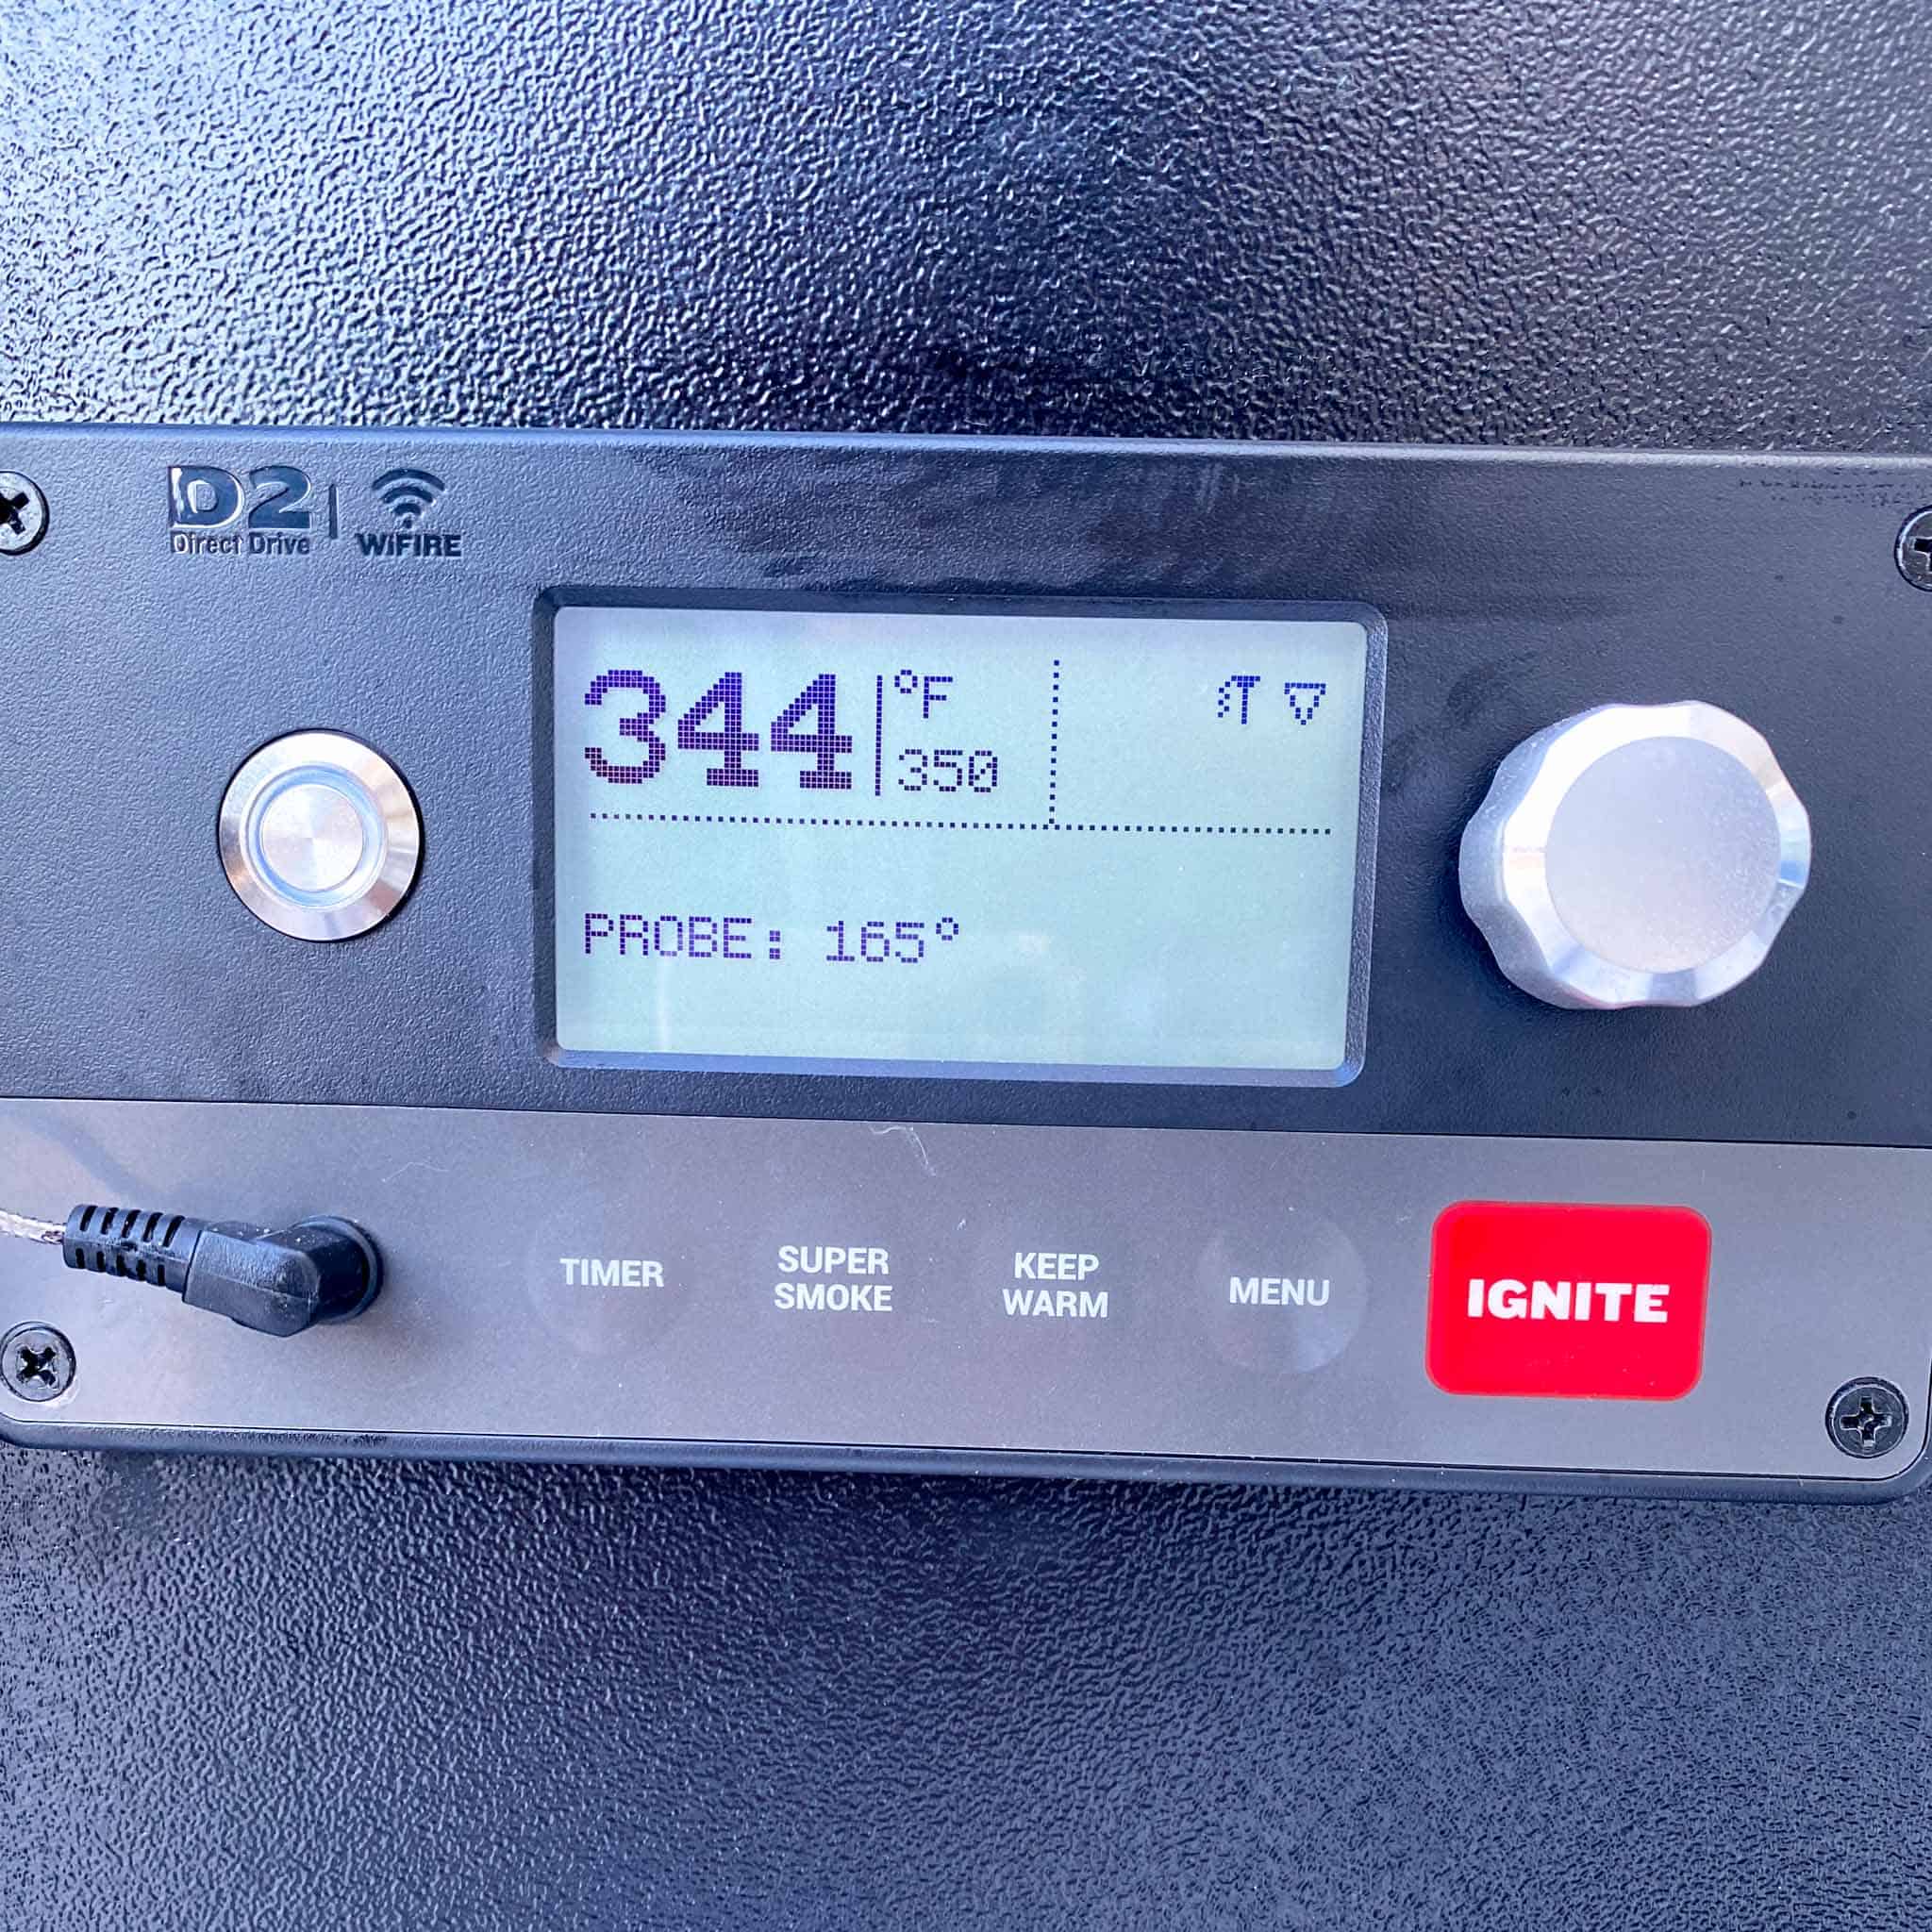 Traeger panel showing 165°F  probe temperature has been reached.